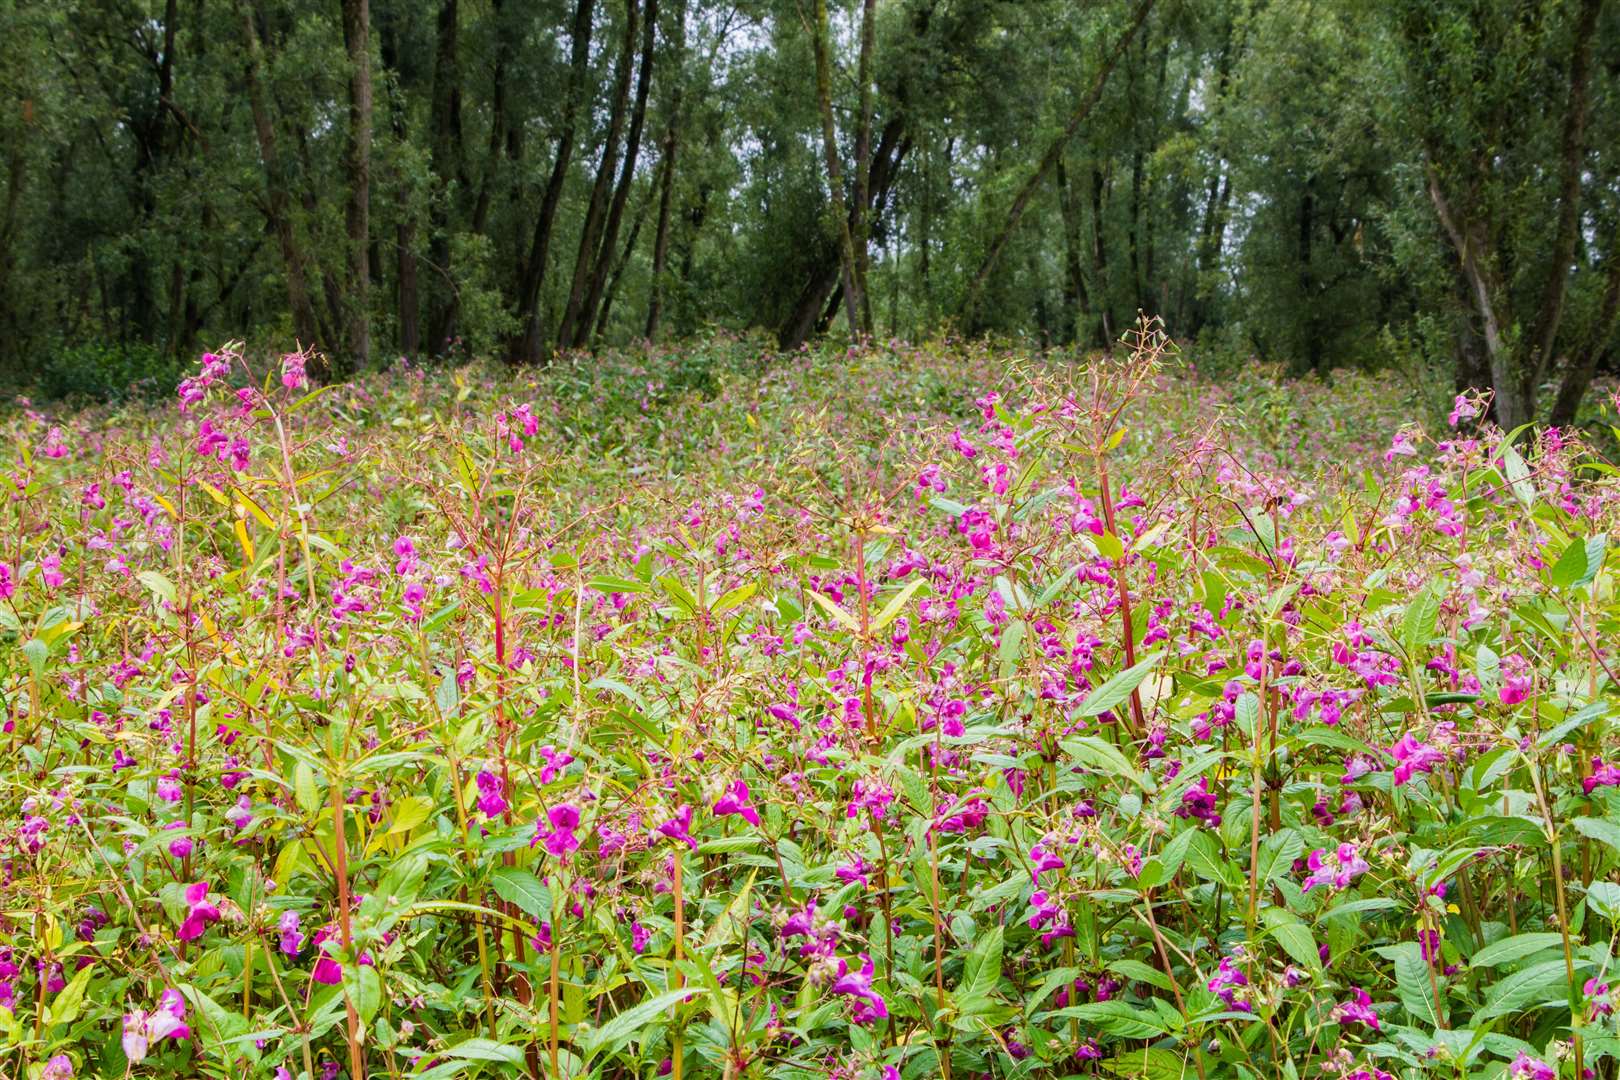 Himalayan Balsam in full pink bloom. Photo: Shutterstock